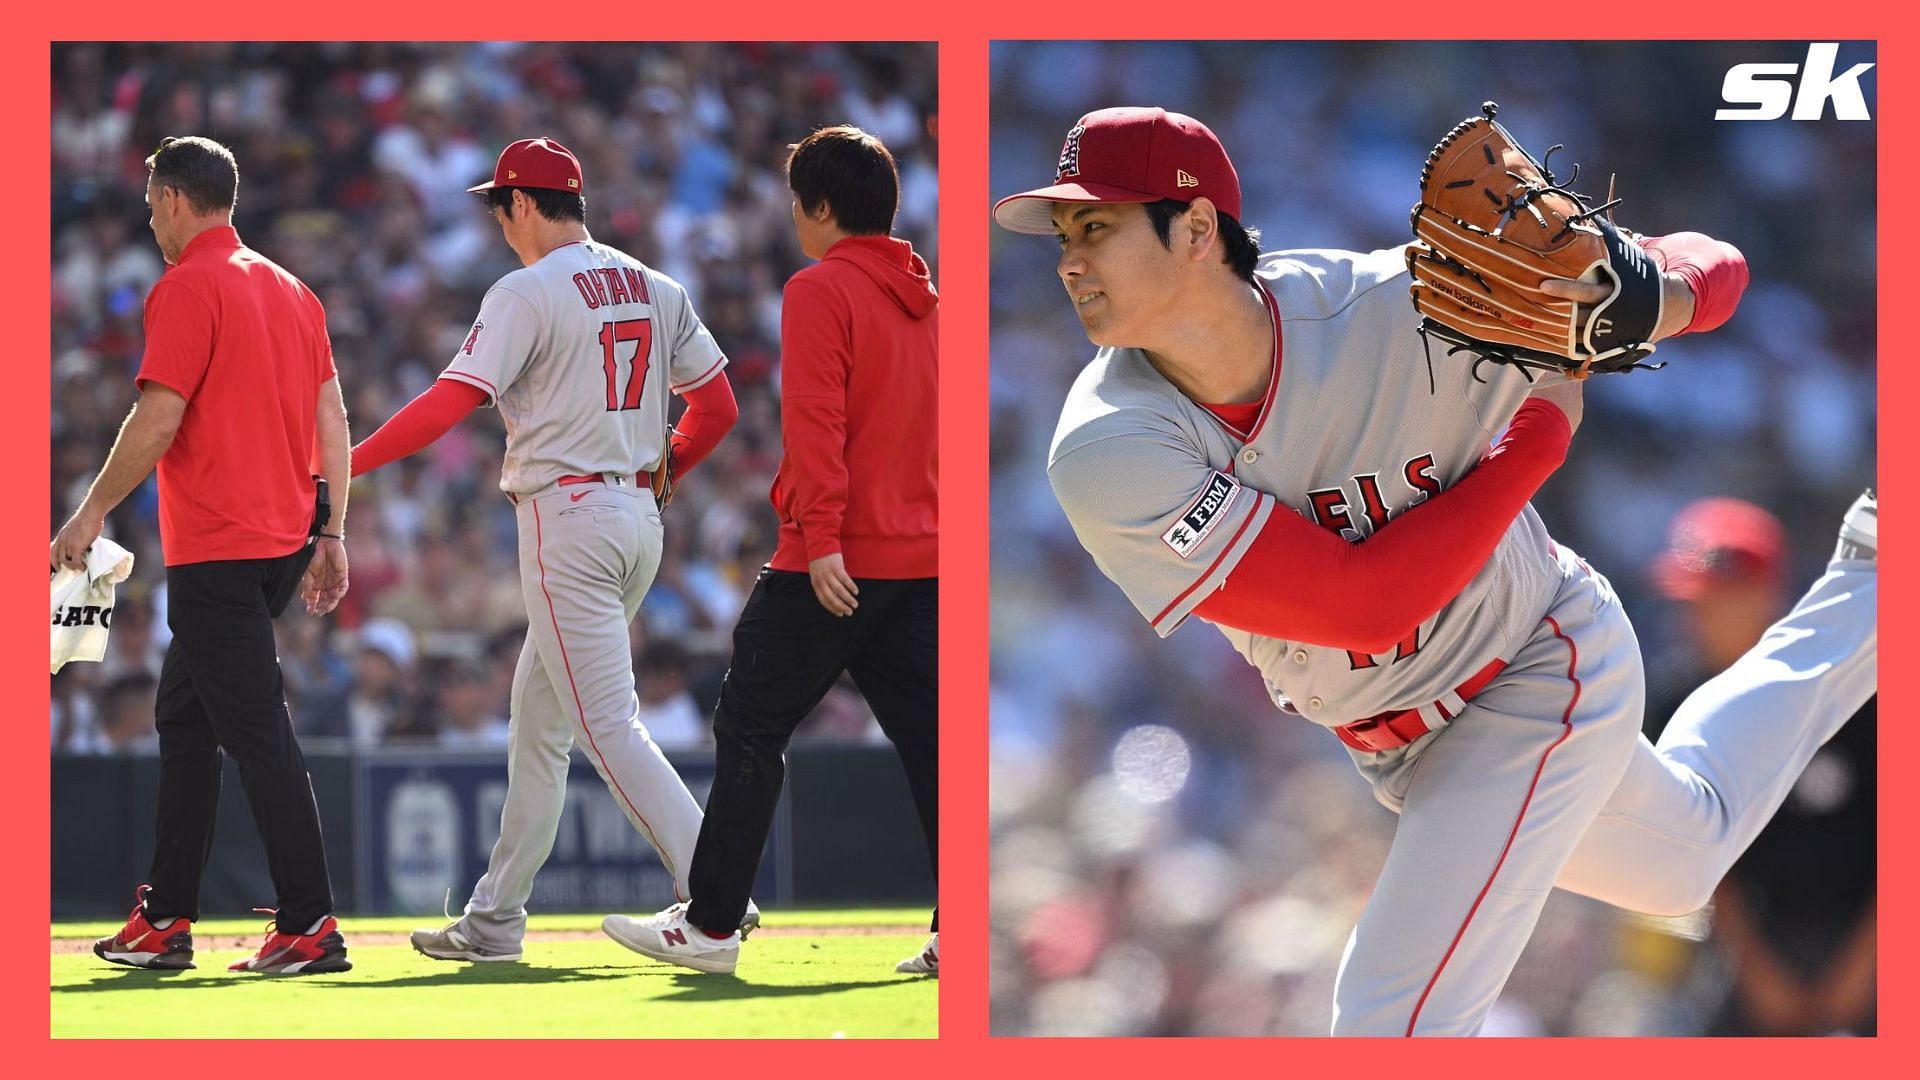 Shohei Ohtani exited the game early with a trainer